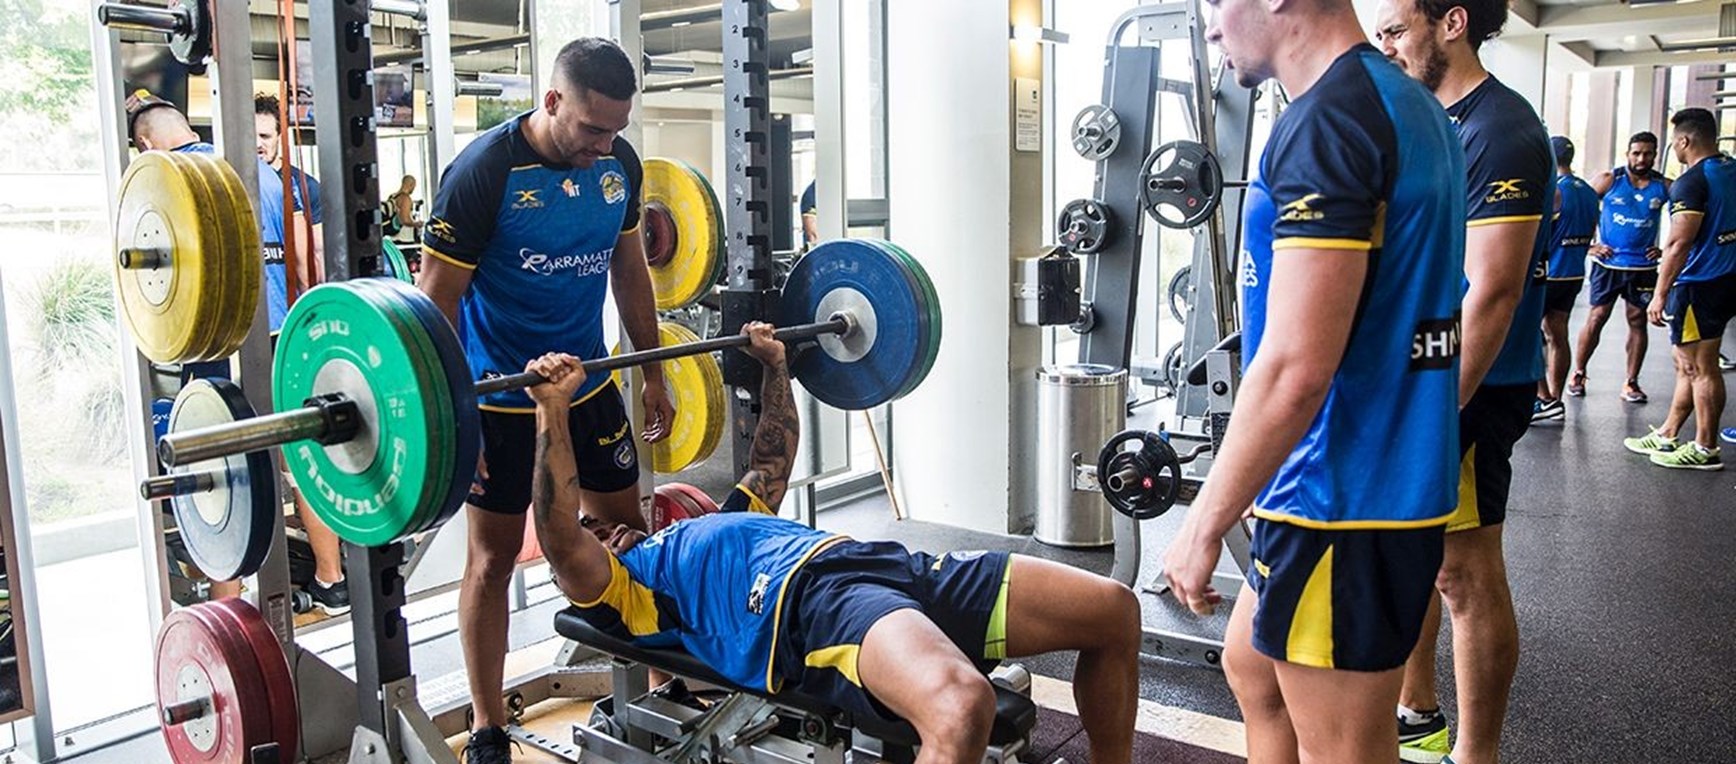 GALLERY | Weights and Spin